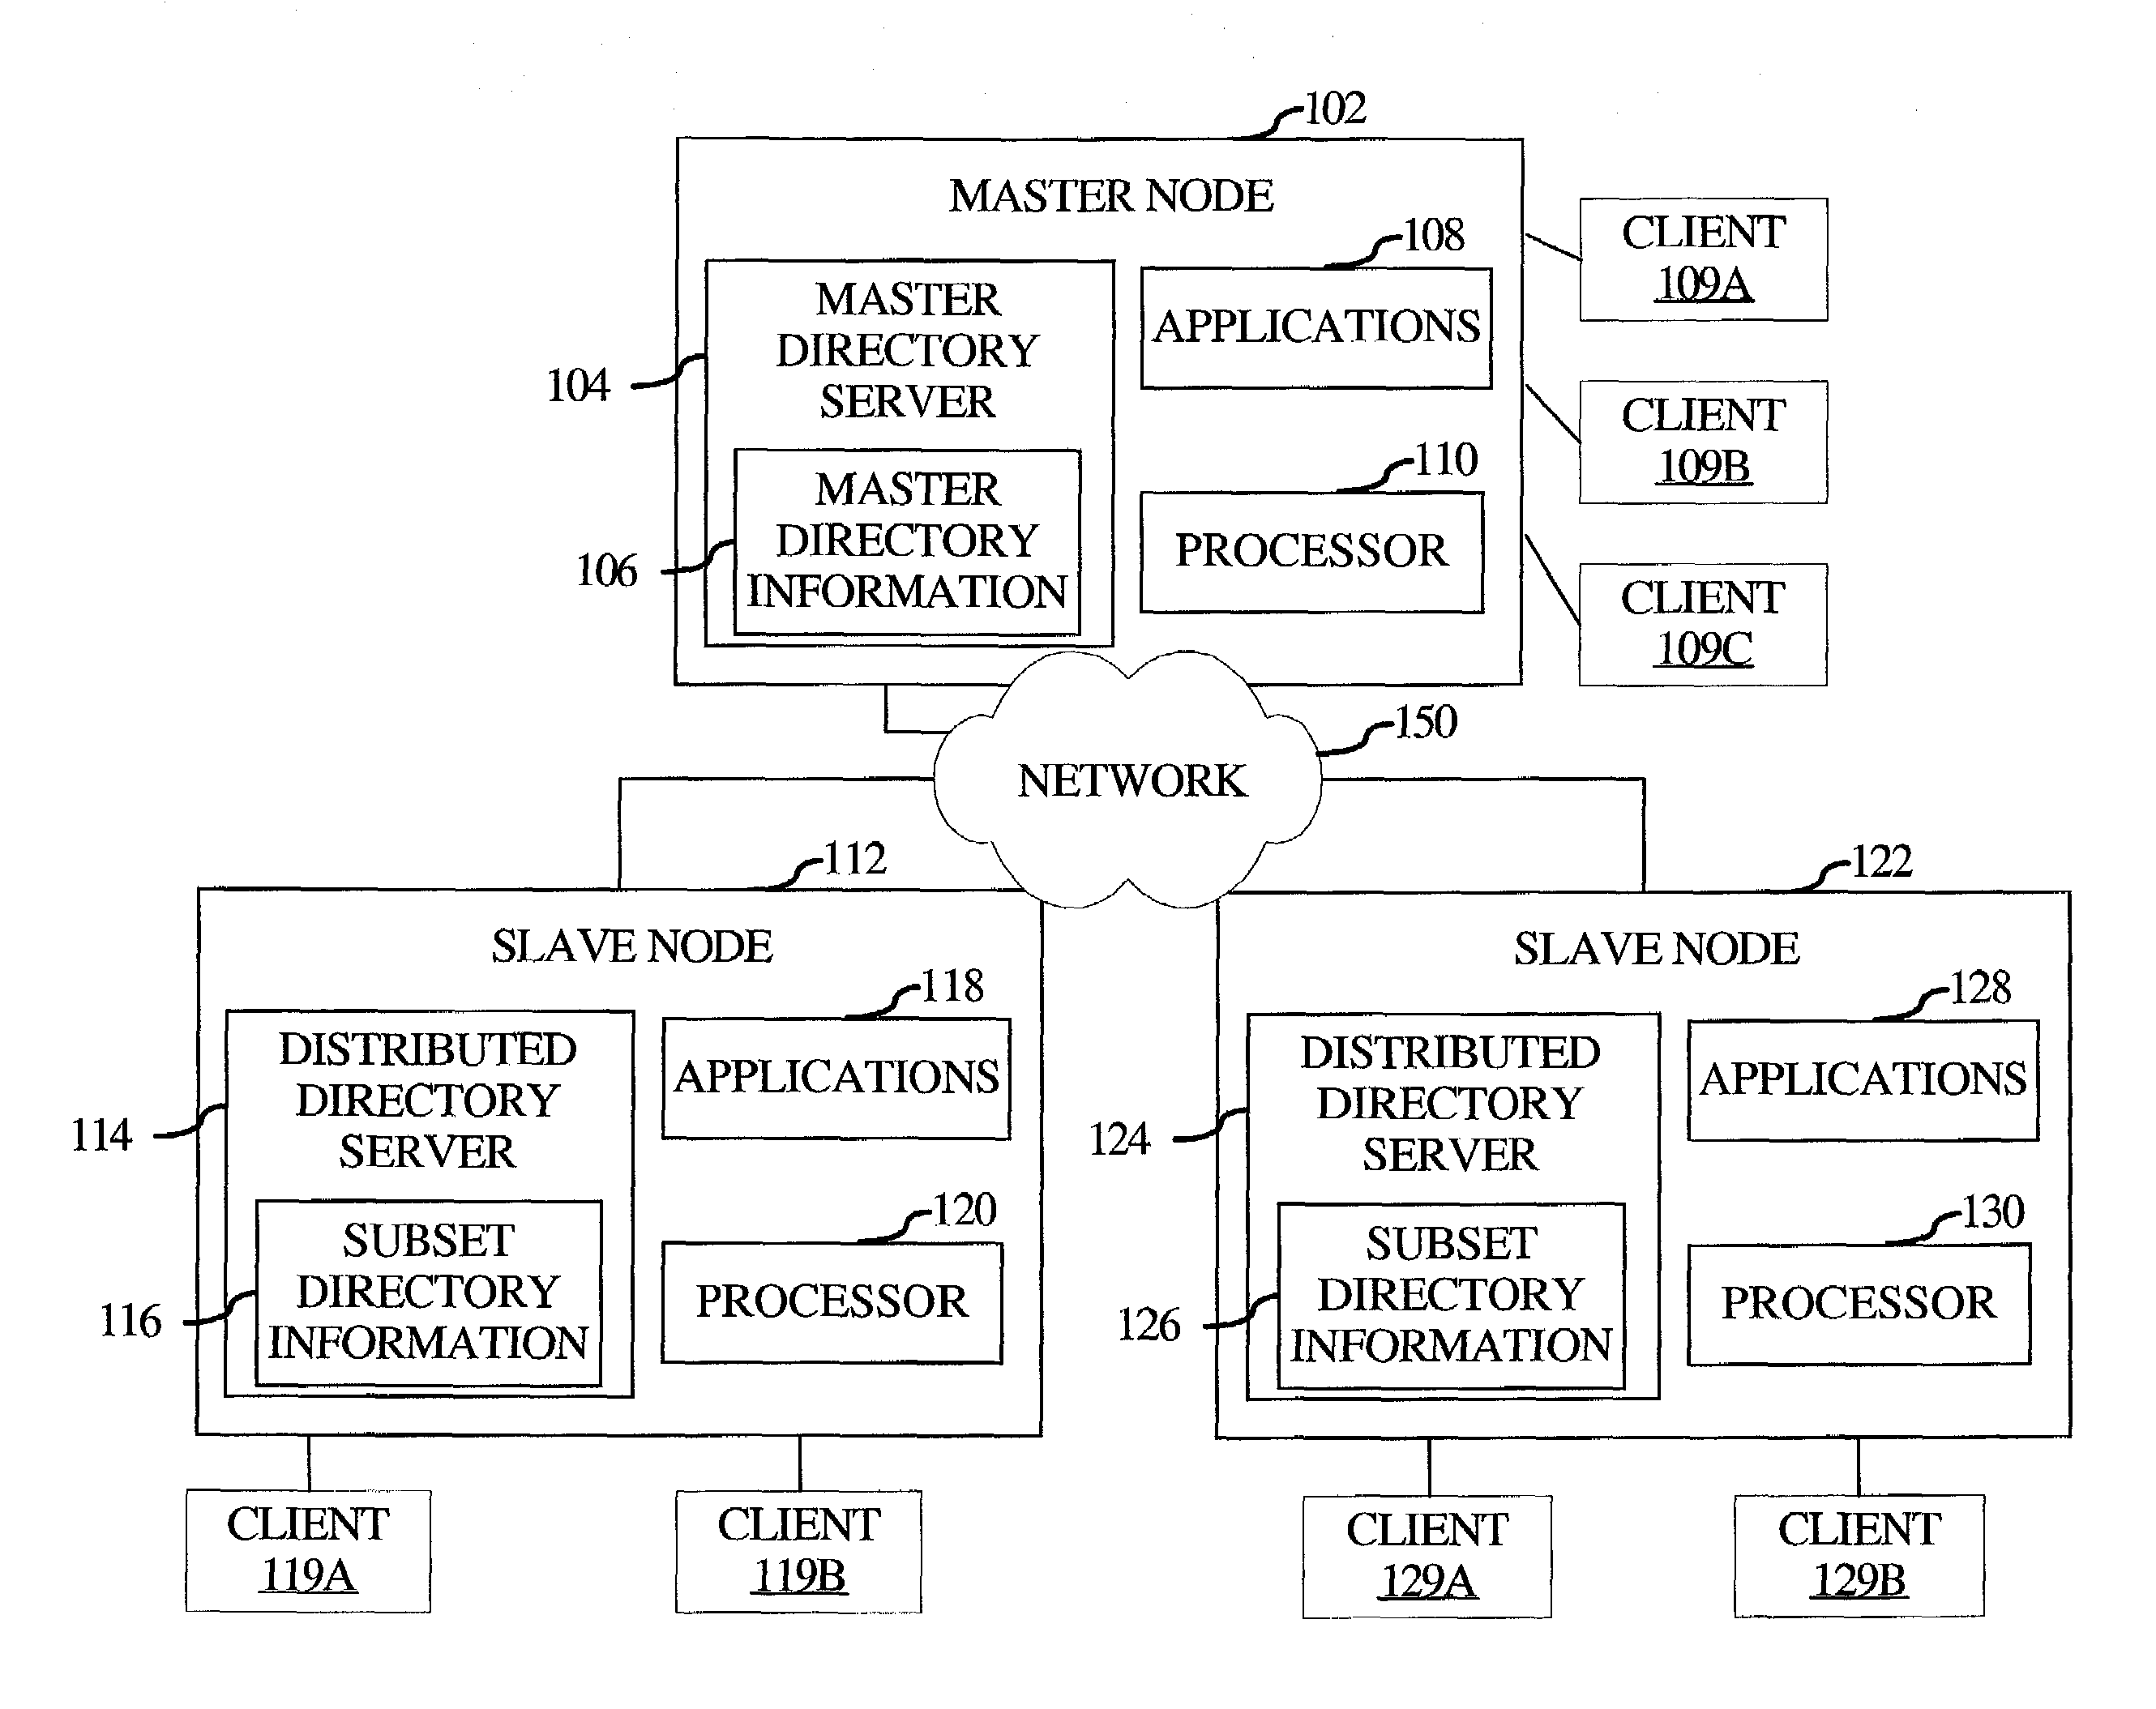 Method and apparatus for partial replication of directory information in a distributed environment